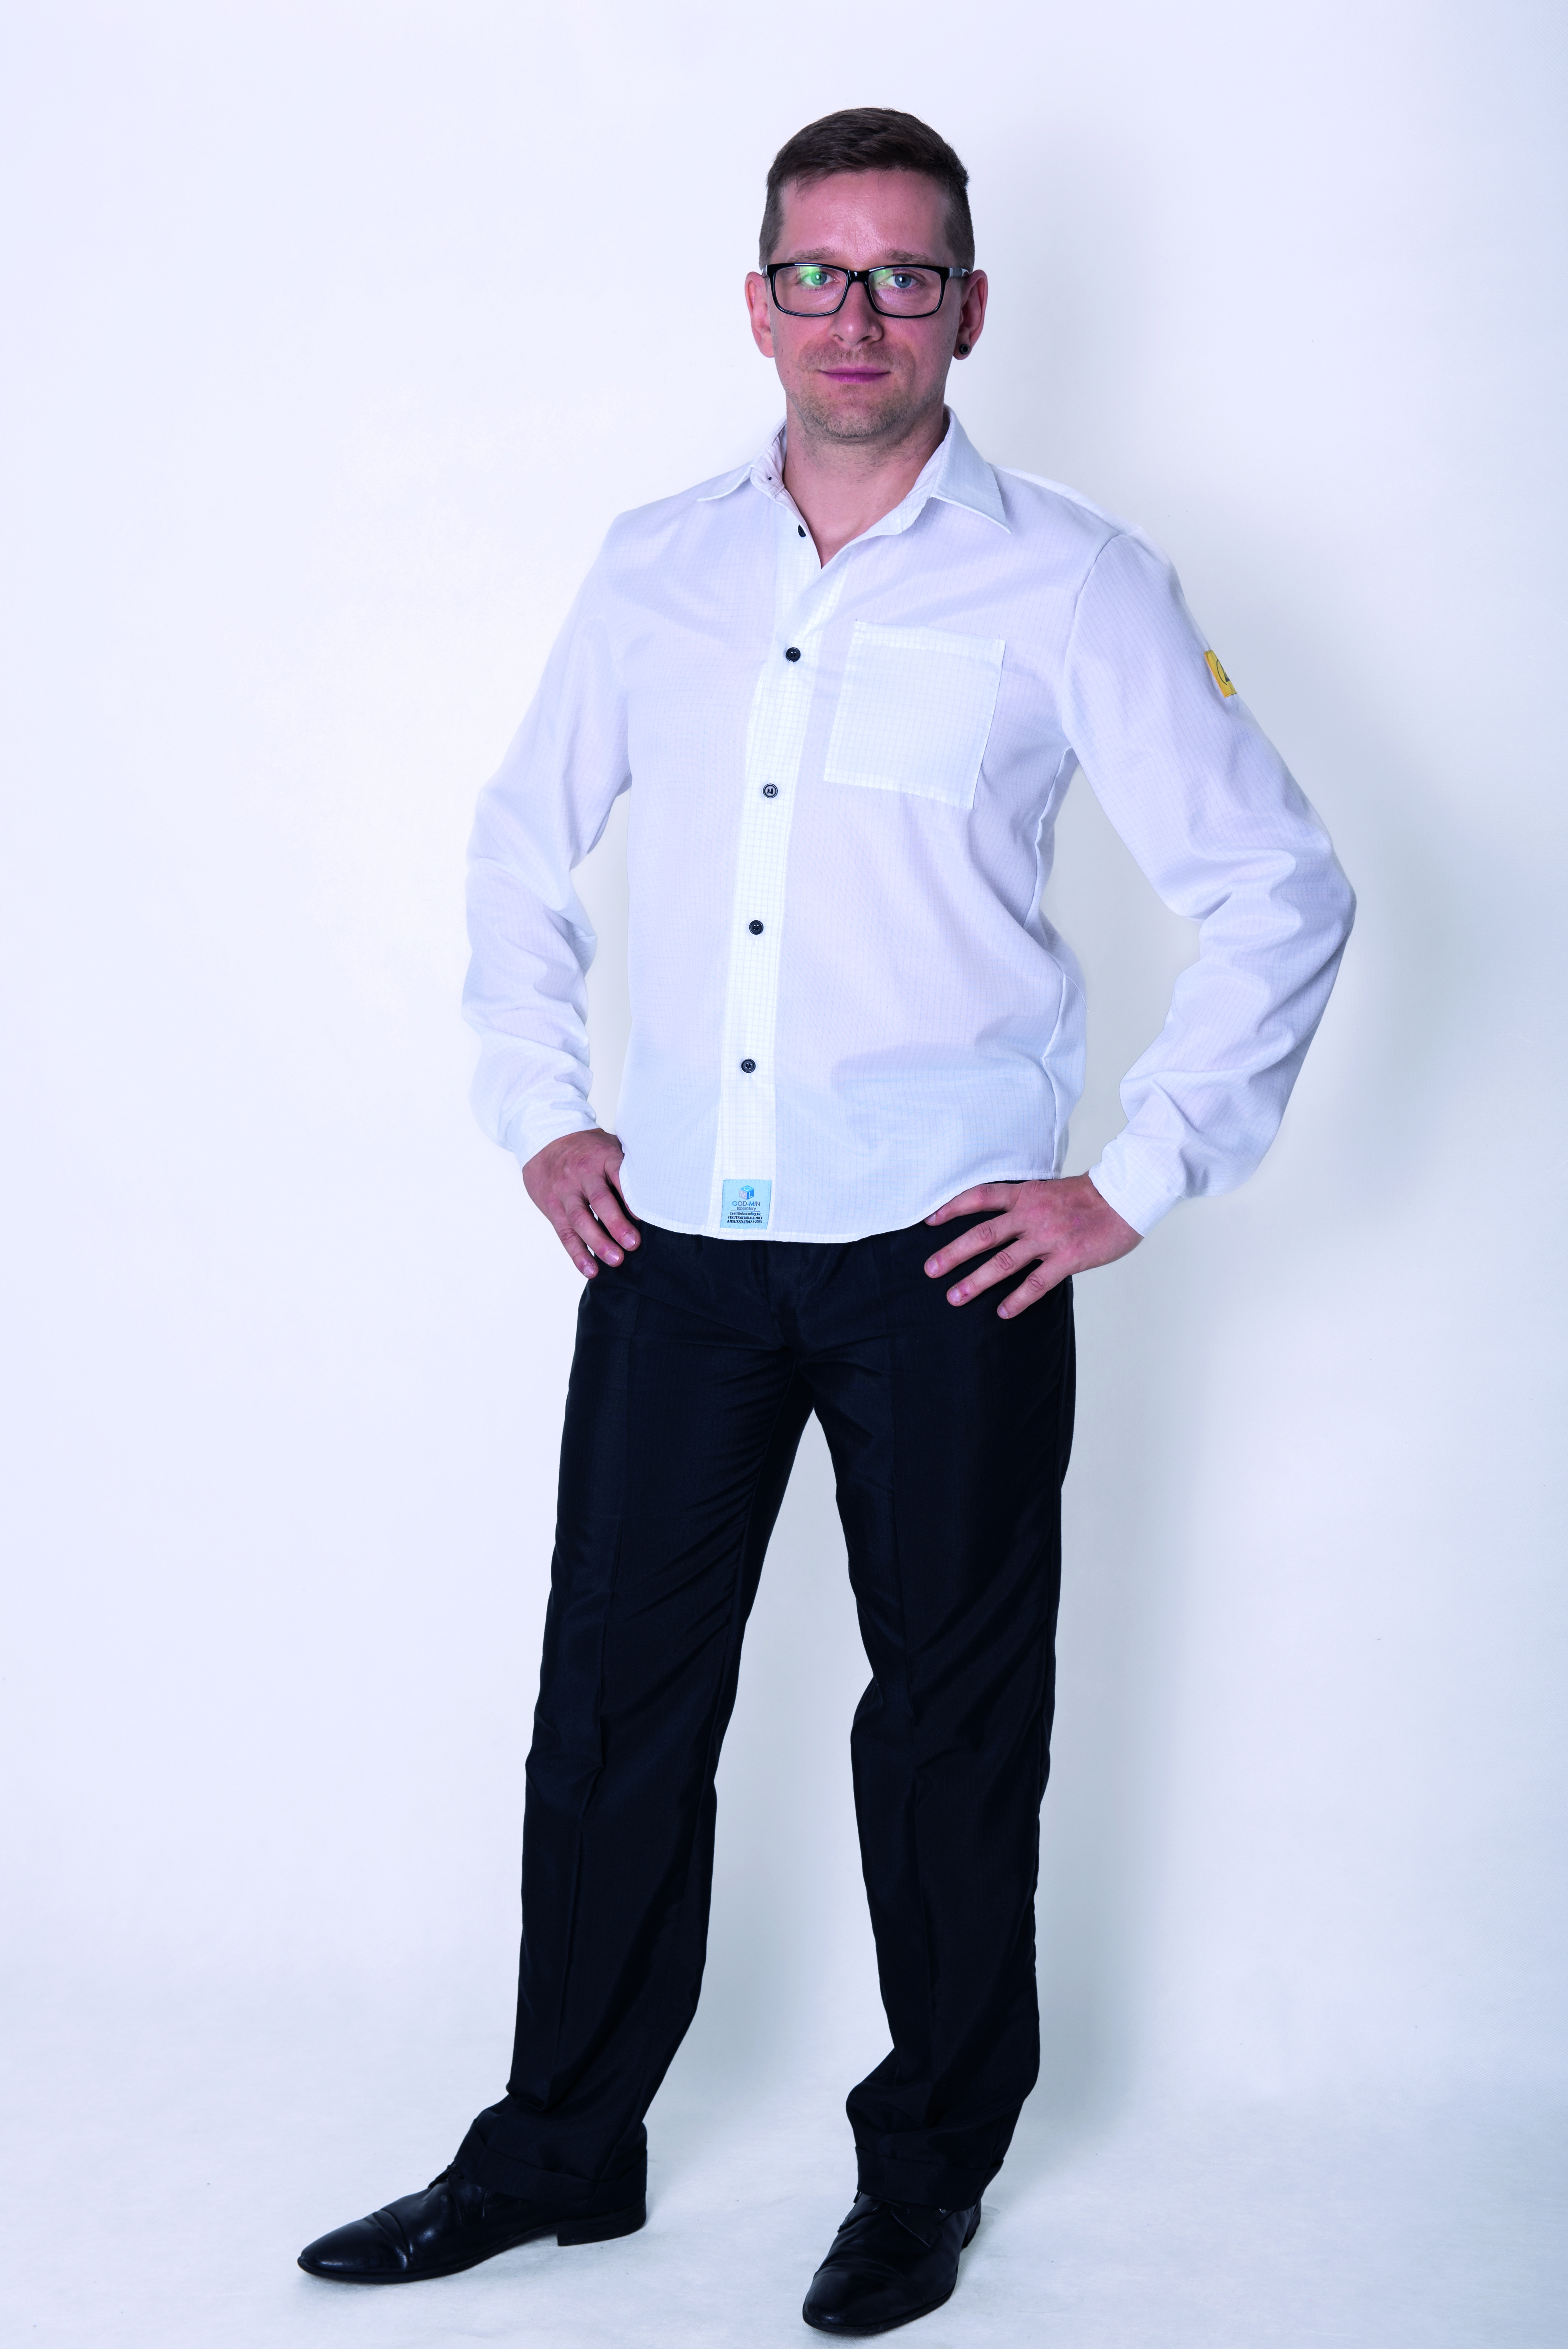 ESD Oxford Shirts Unisex Business ING White Shirts With Long Sleeves & Breast Pocket TH55 Fabric